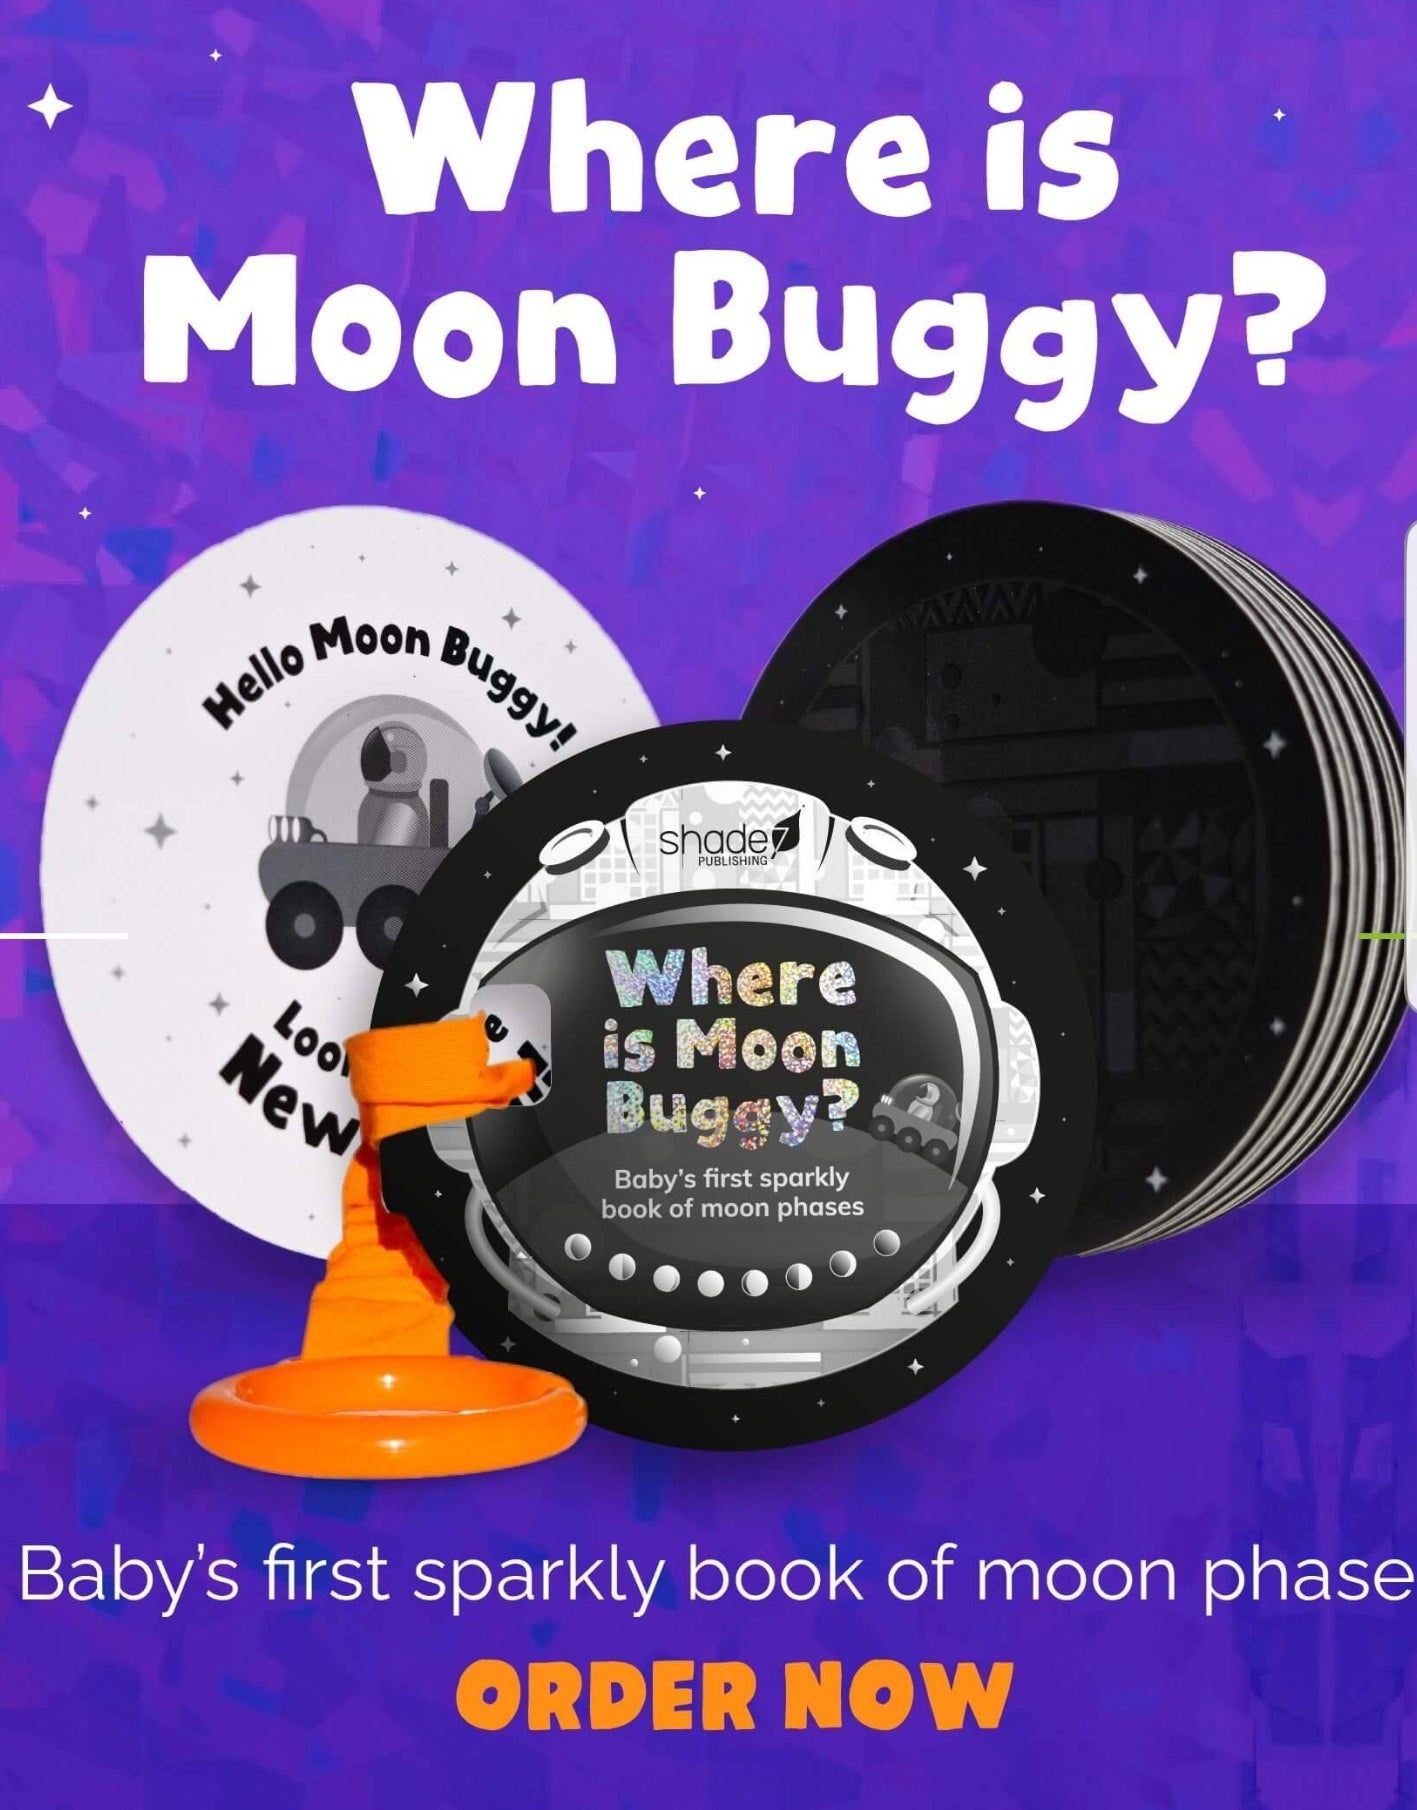 Where is the Moon Buggy? Baby's First Book of the Phases of the Moon